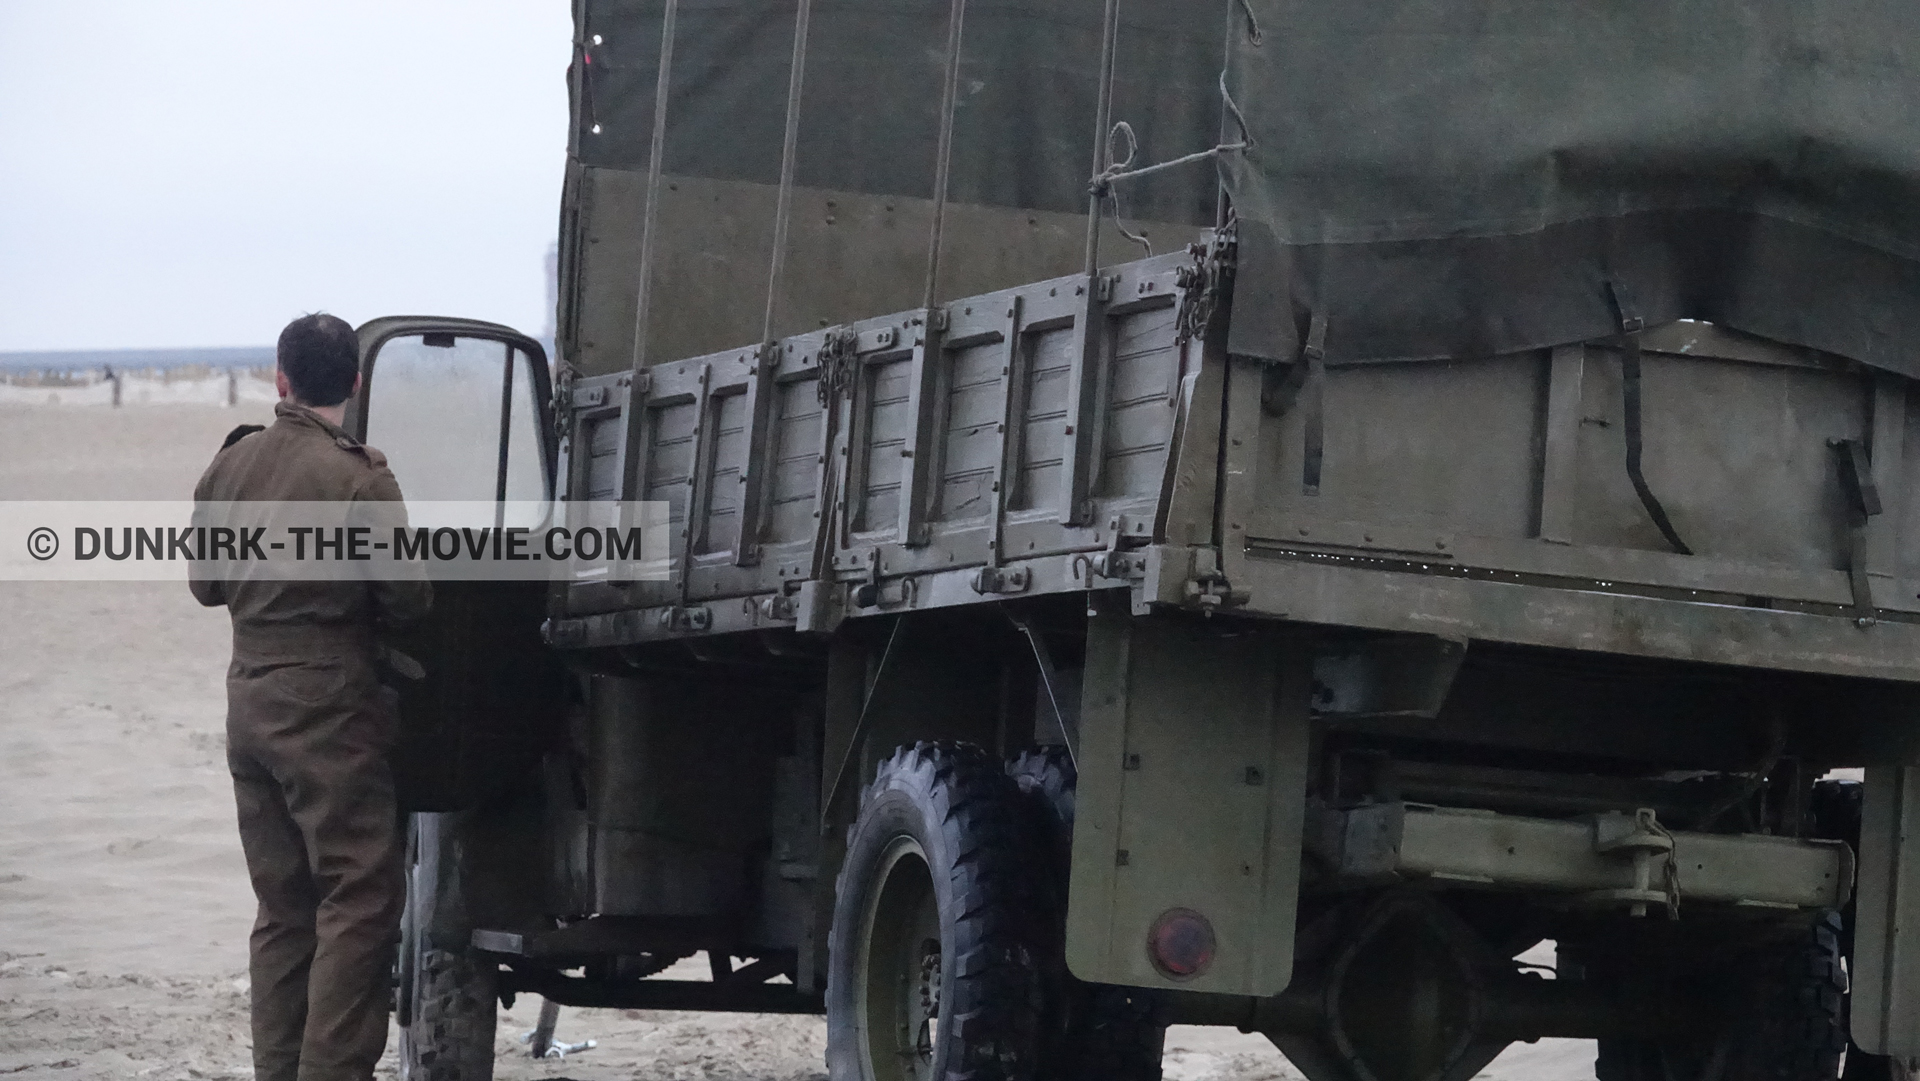 Picture with truck, supernumeraries, beach,  from behind the scene of the Dunkirk movie by Nolan